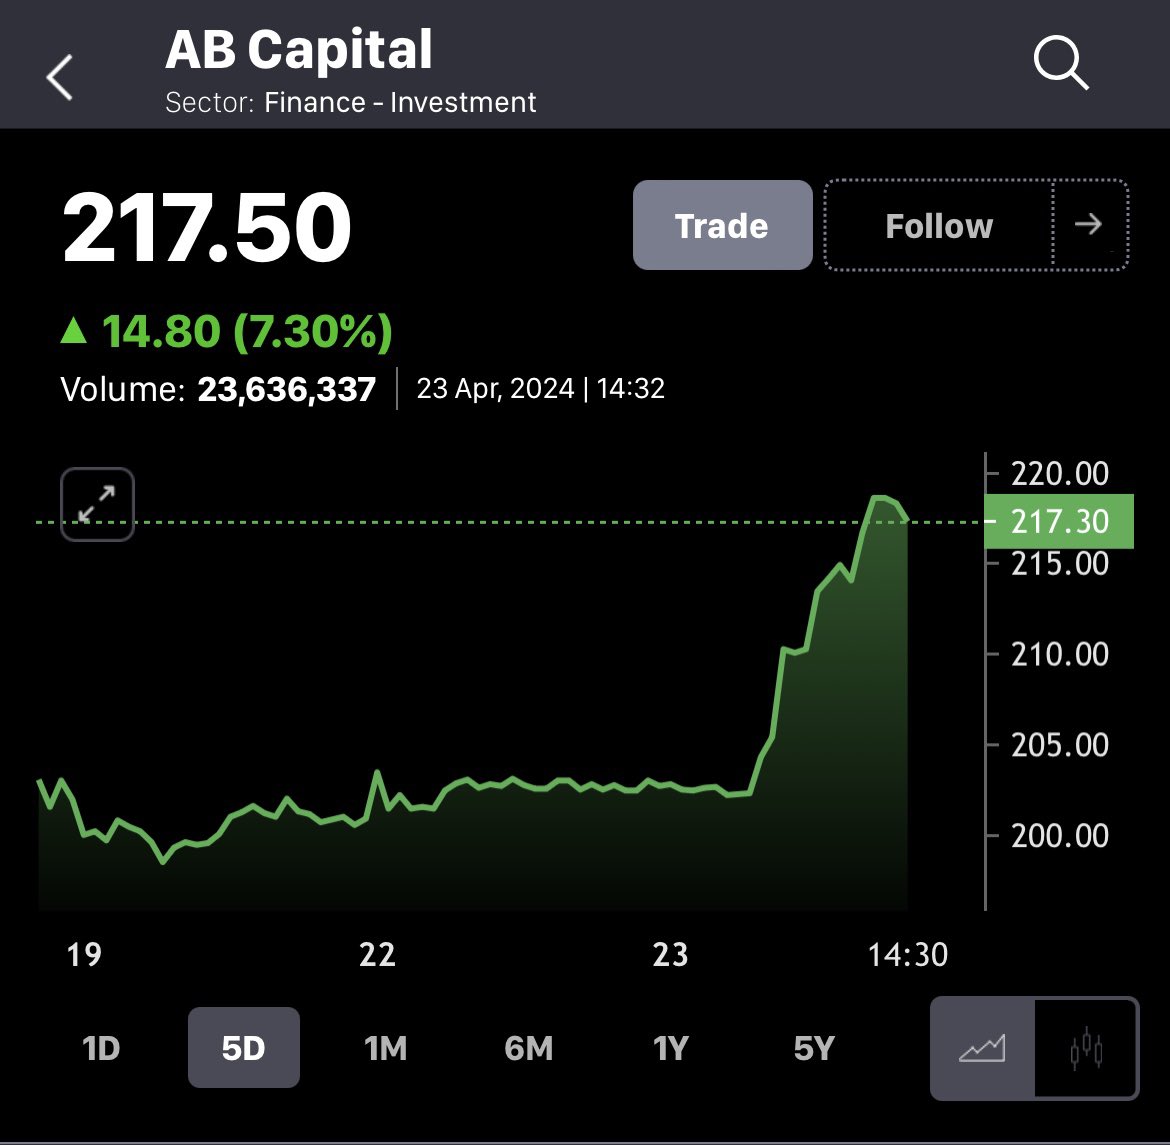 AB Capital 10% Up In 2 Days 📊🚀

Was Long From 187.90 📌
Current High 220 📌
Expected Target 280,300 🎯

#BreakoutStock #Pennystocks #StockMarketindia #StocksToWatch #StocksToBuy #SwingTrading #Stocks